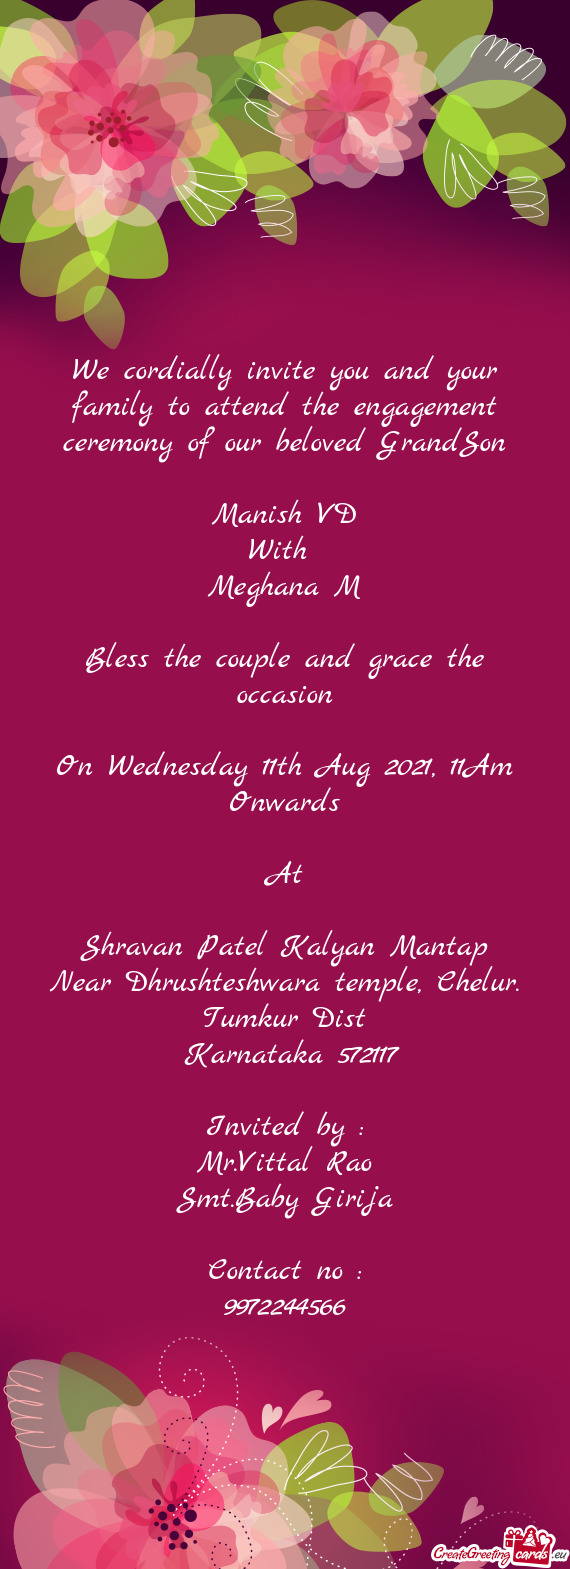 We cordially invite you and your family to attend the engagement ceremony of our beloved GrandSon